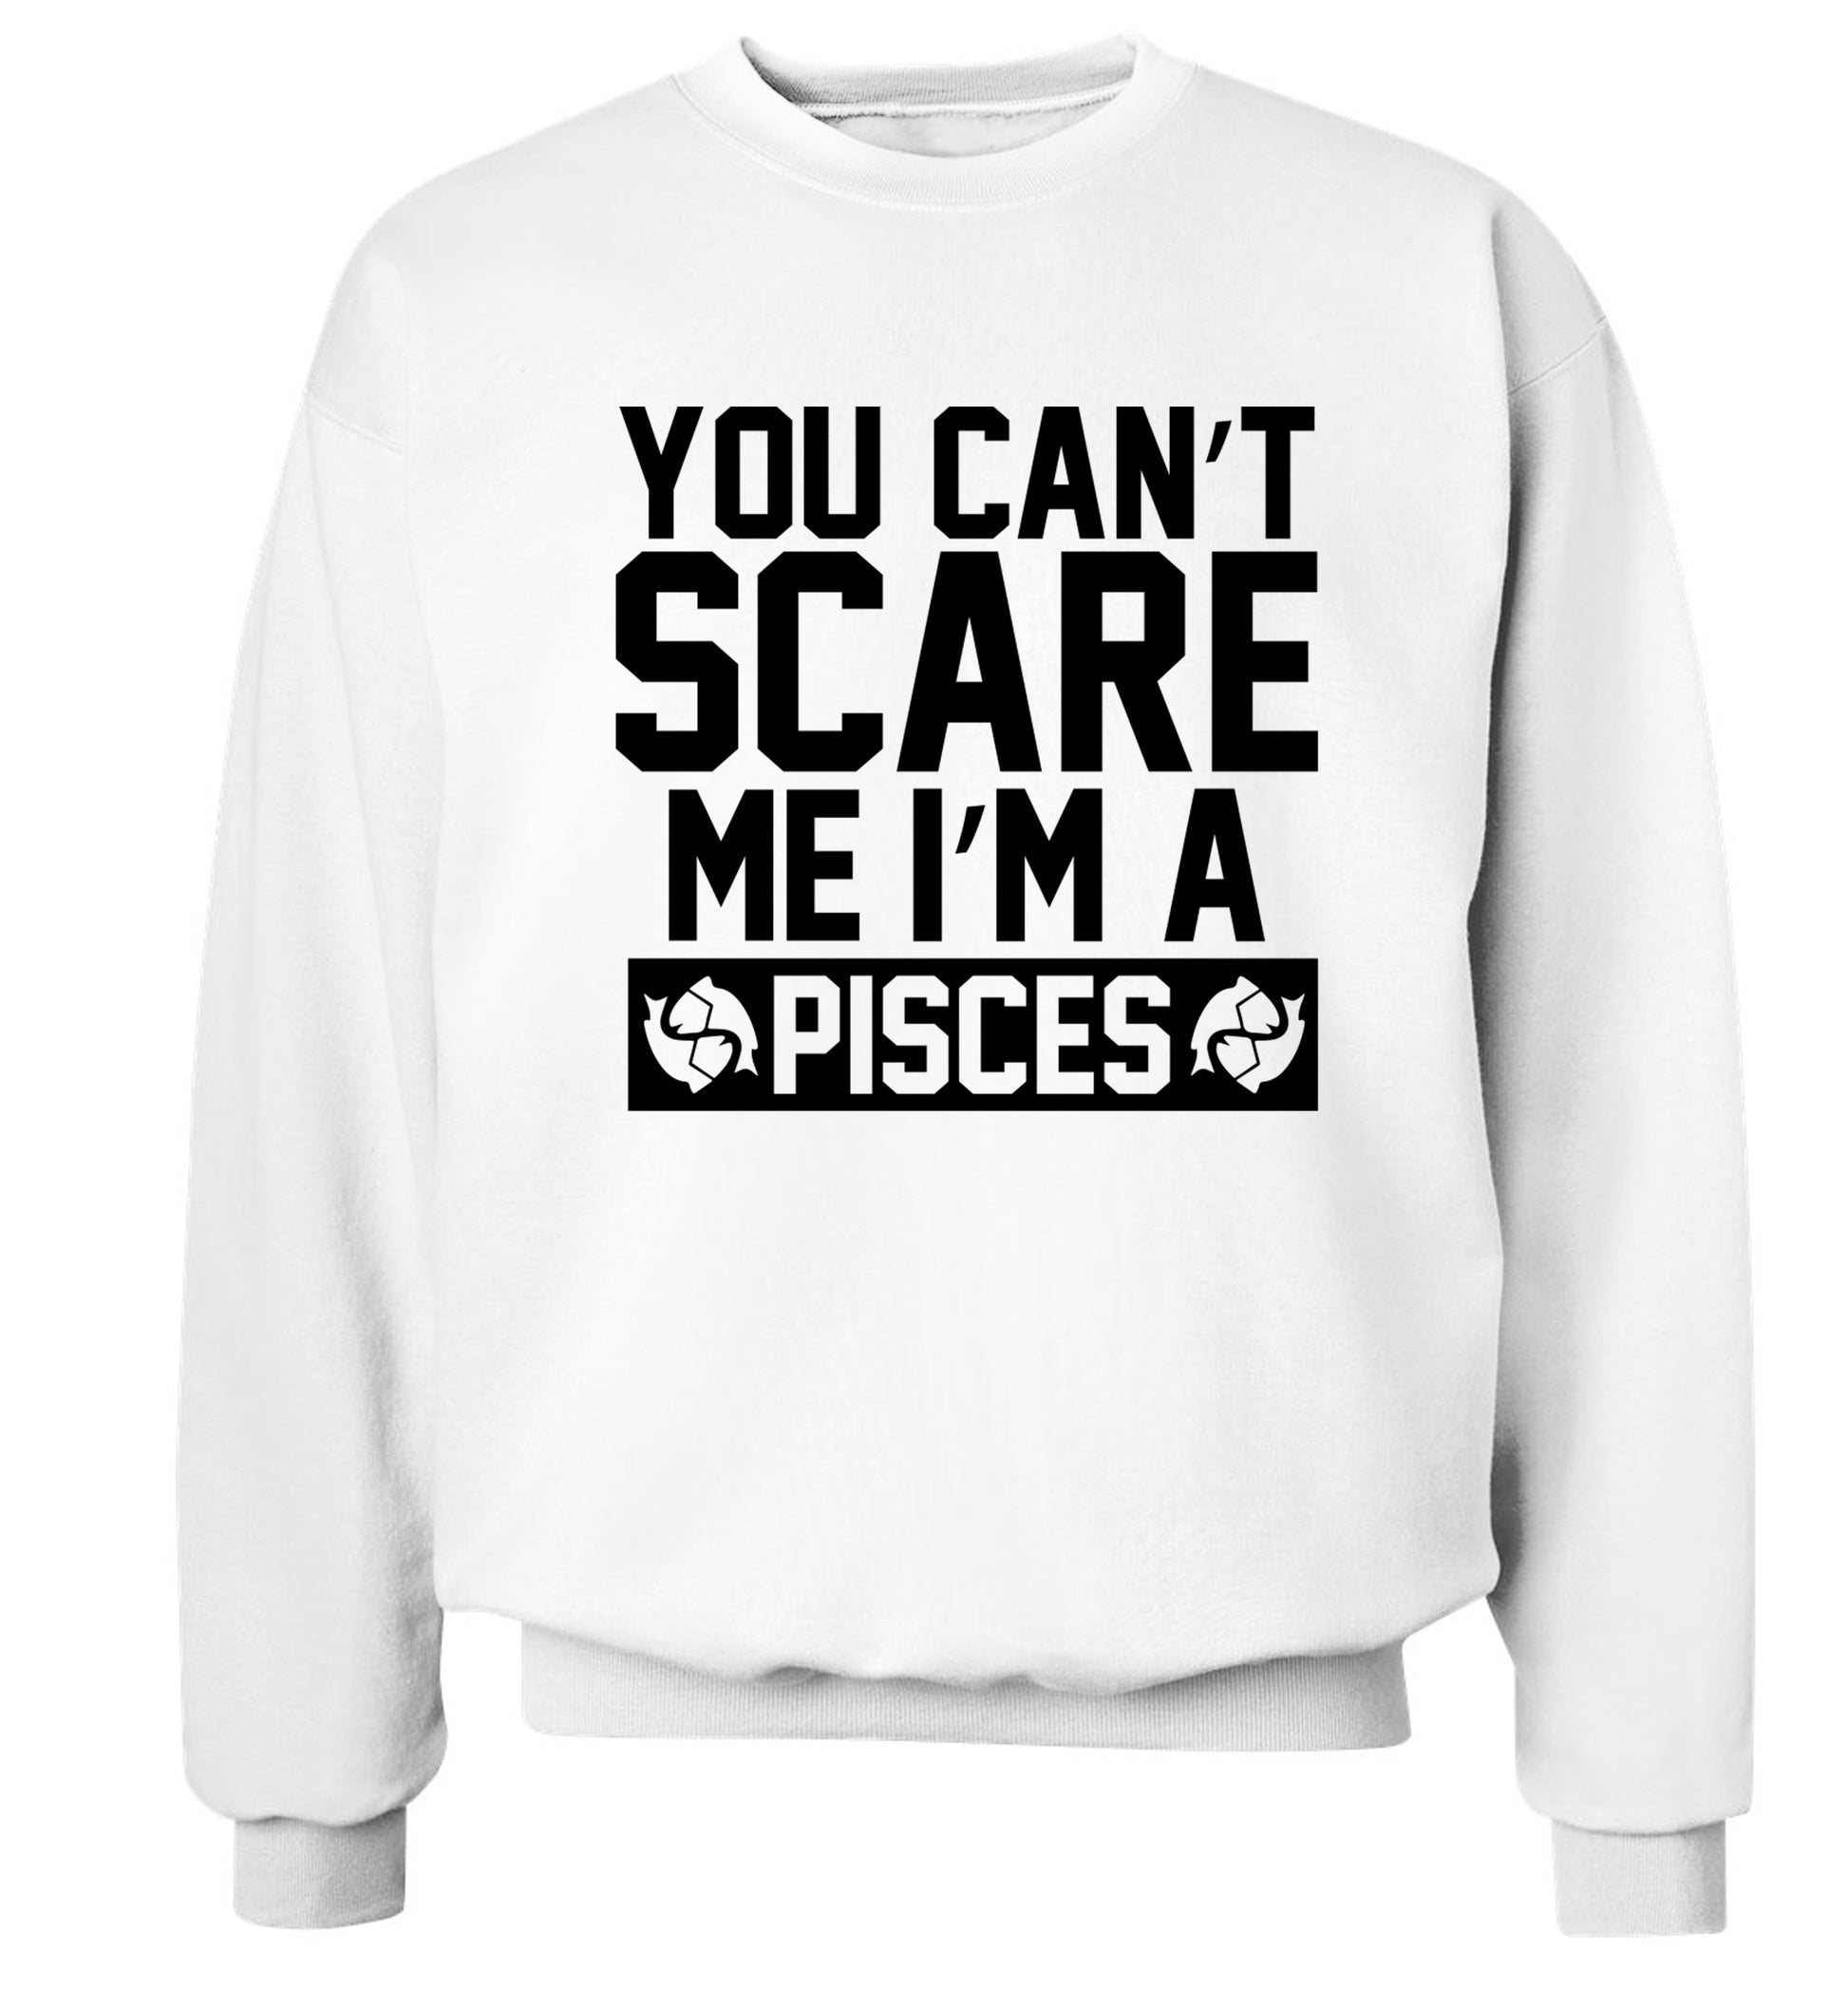 You can't scare me I'm a pisces Adult's unisex white Sweater 2XL